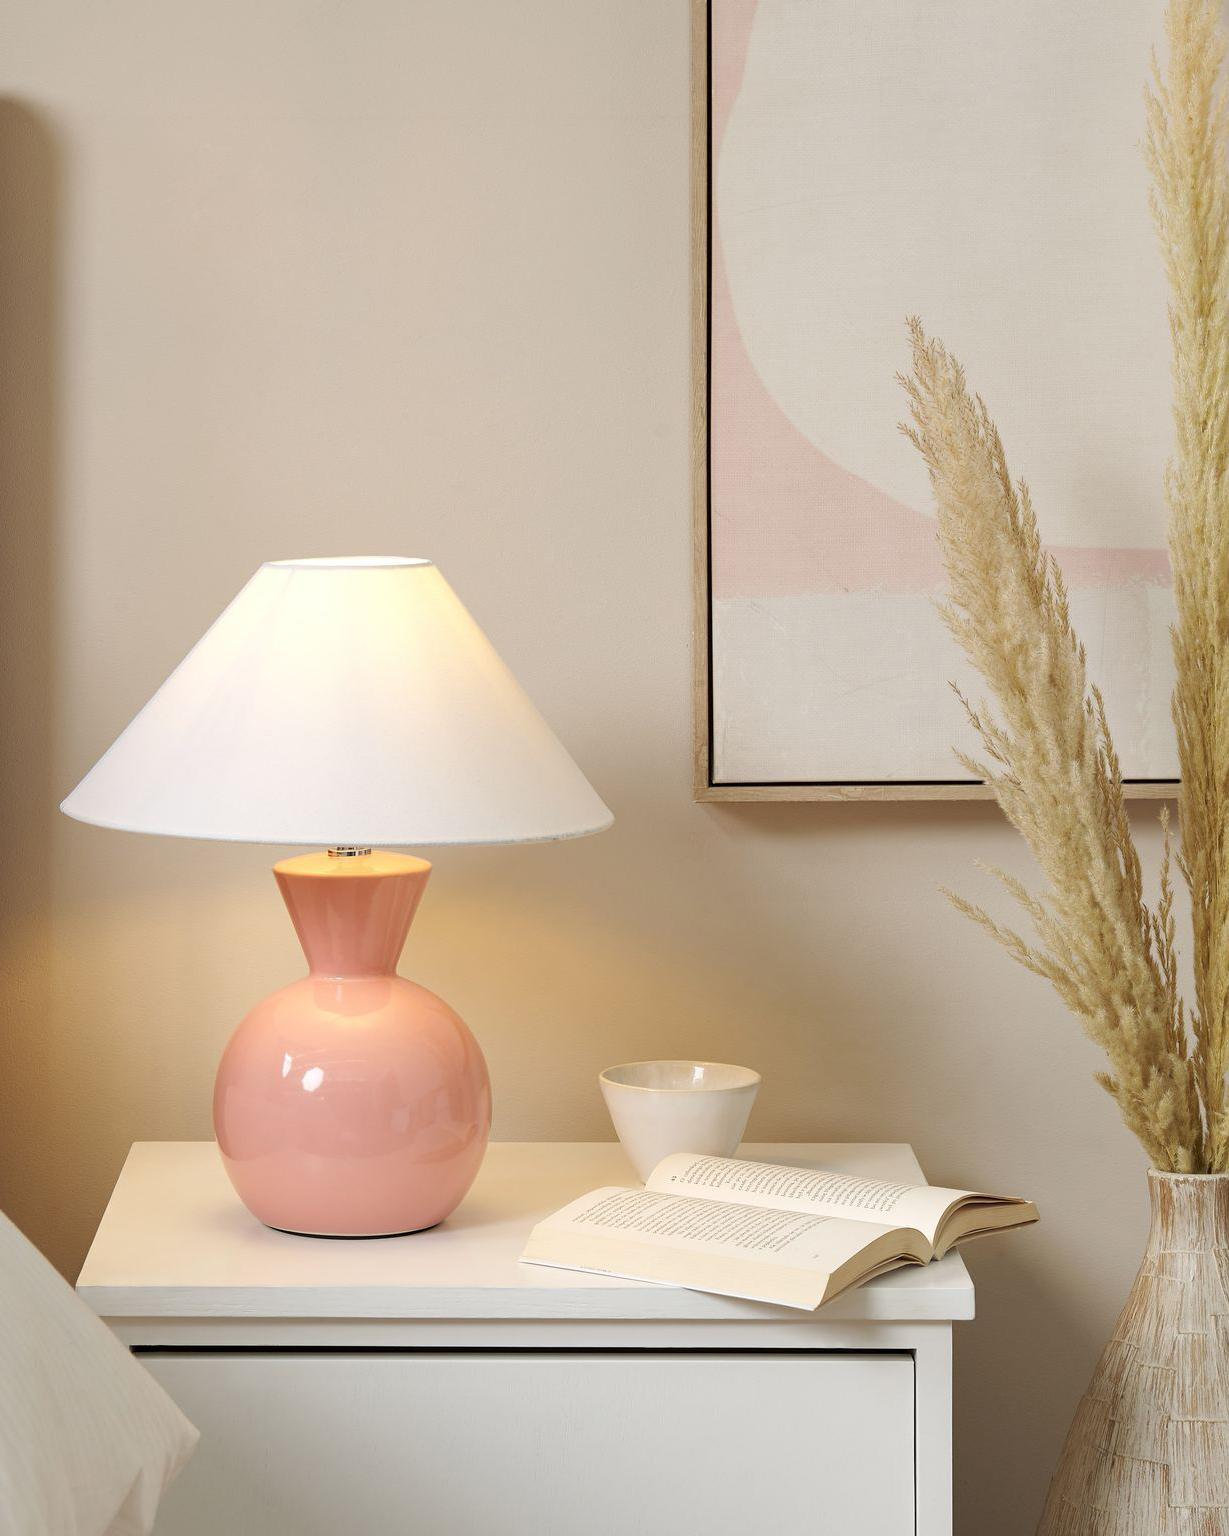 Ceramic Table Lamp Pink FERRY_843221